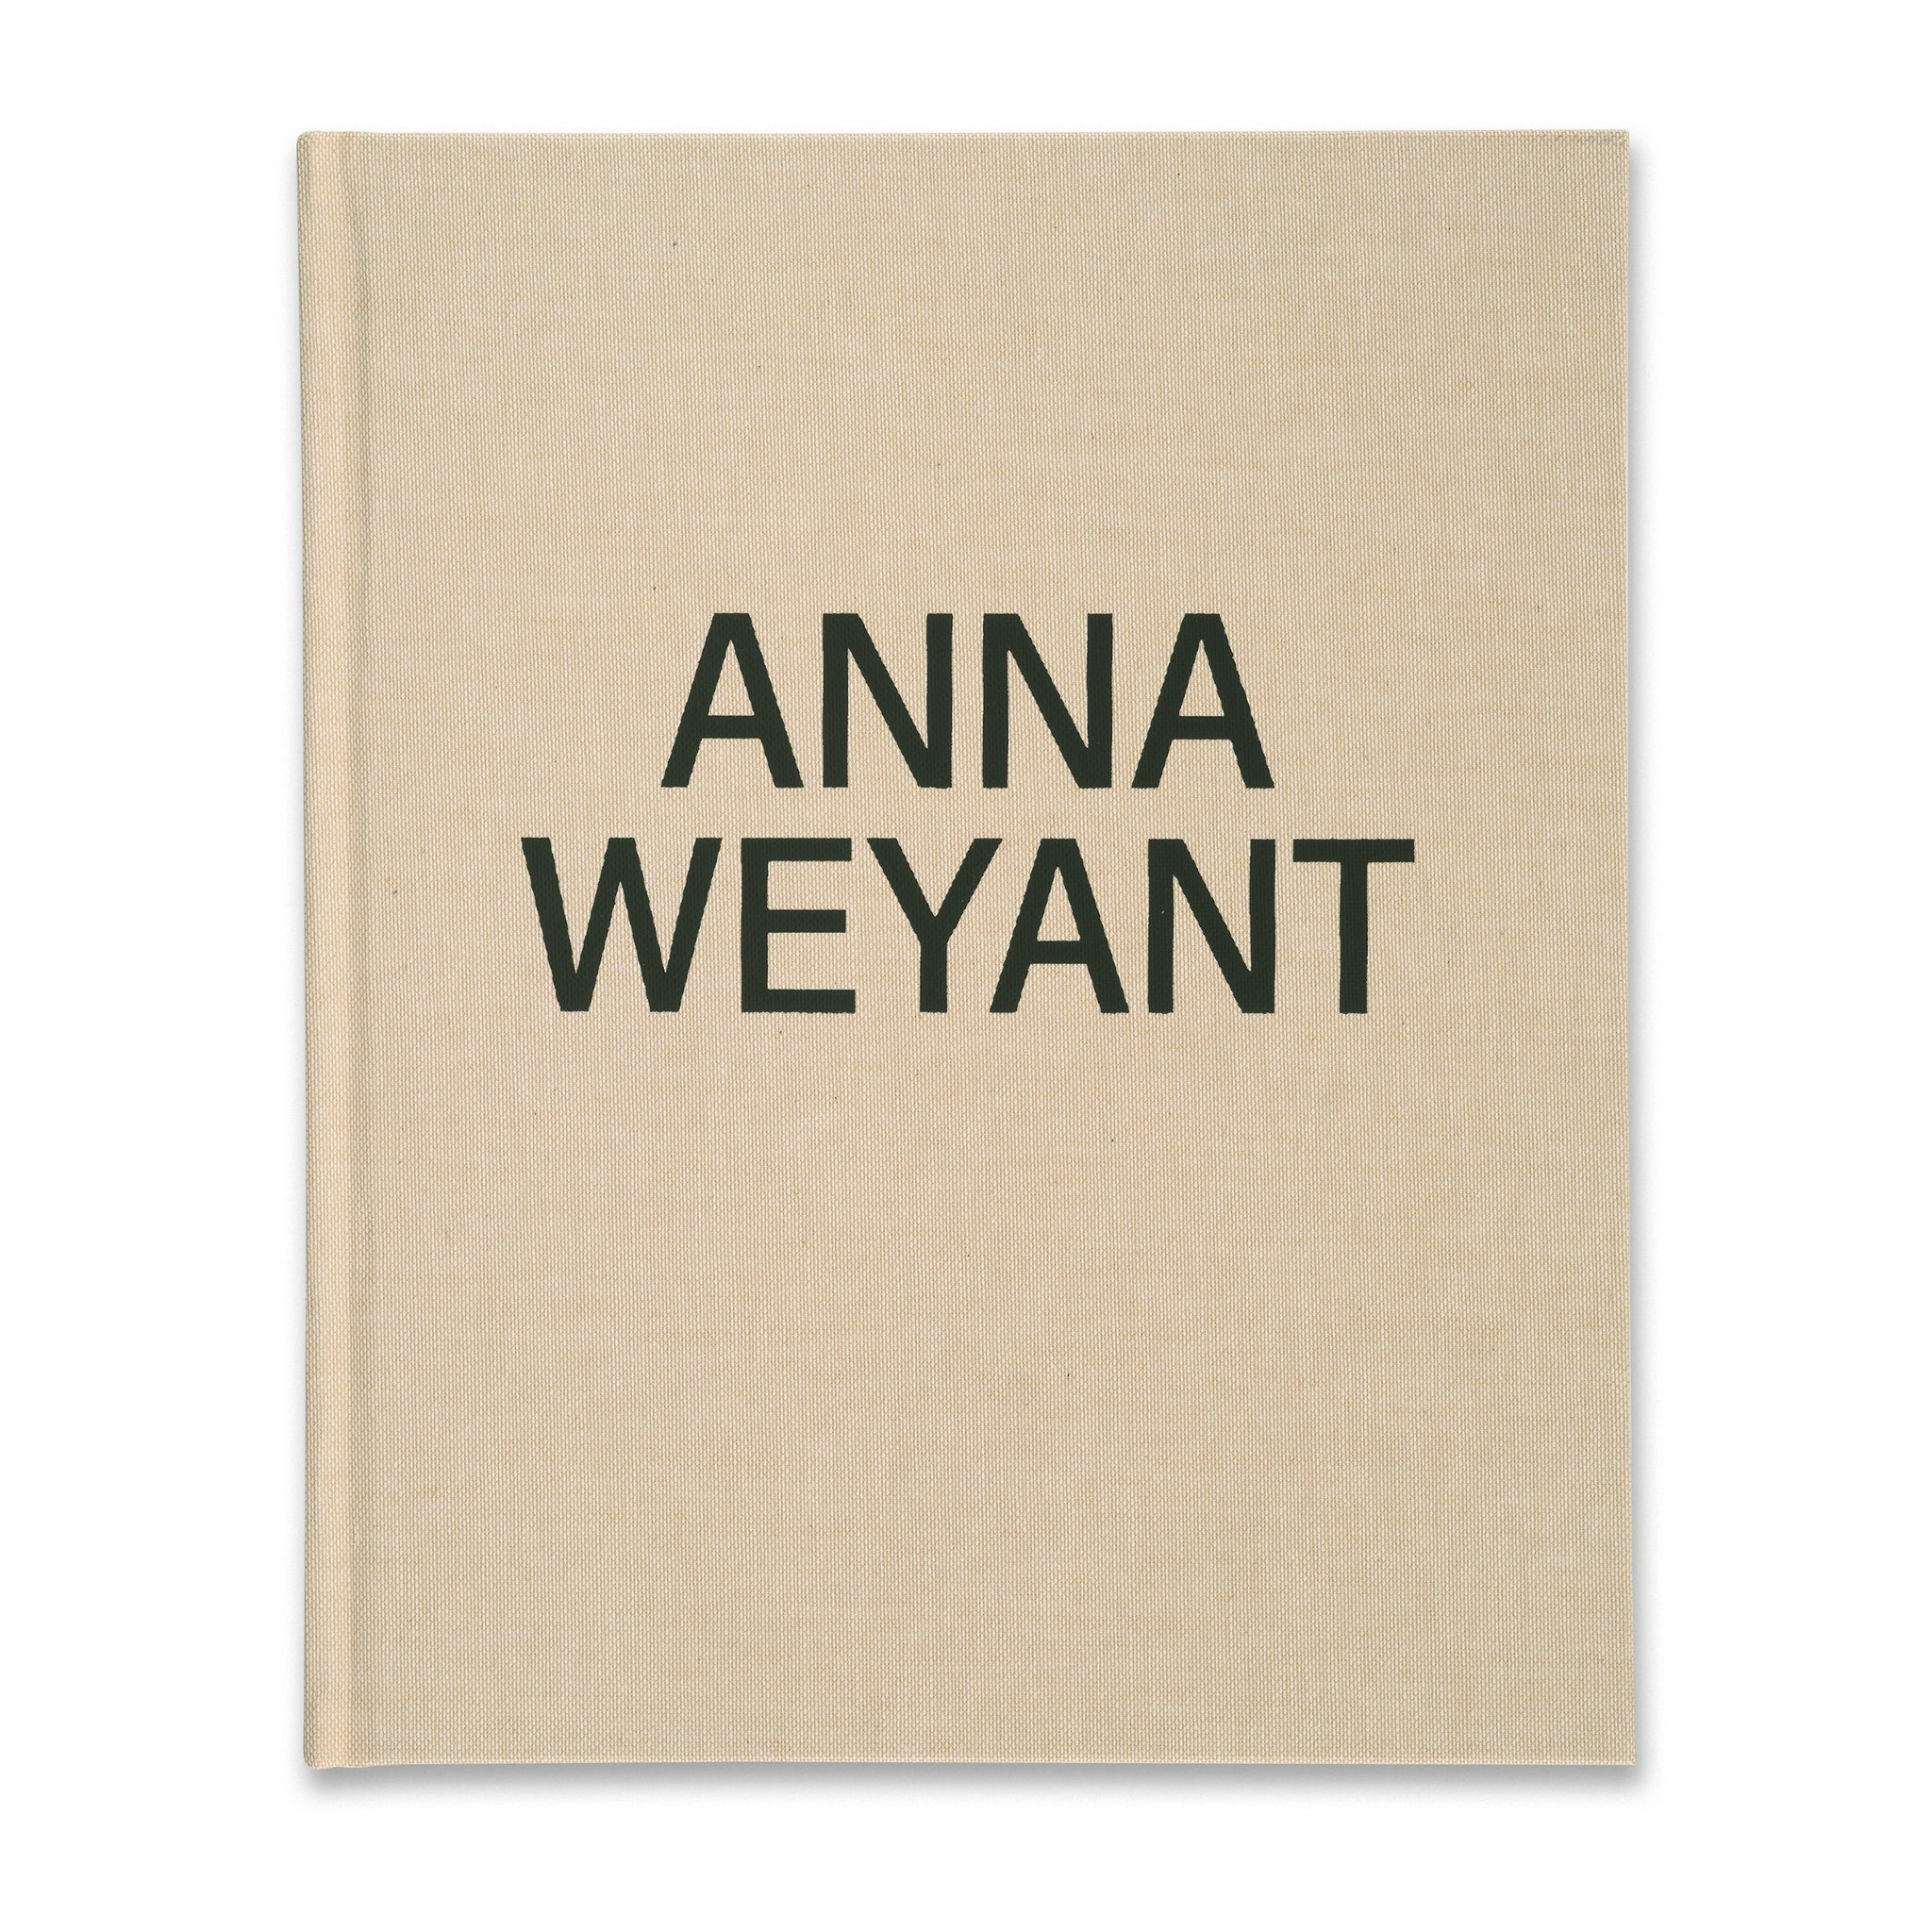 Front cover of the Anna Weyant paintings monograph